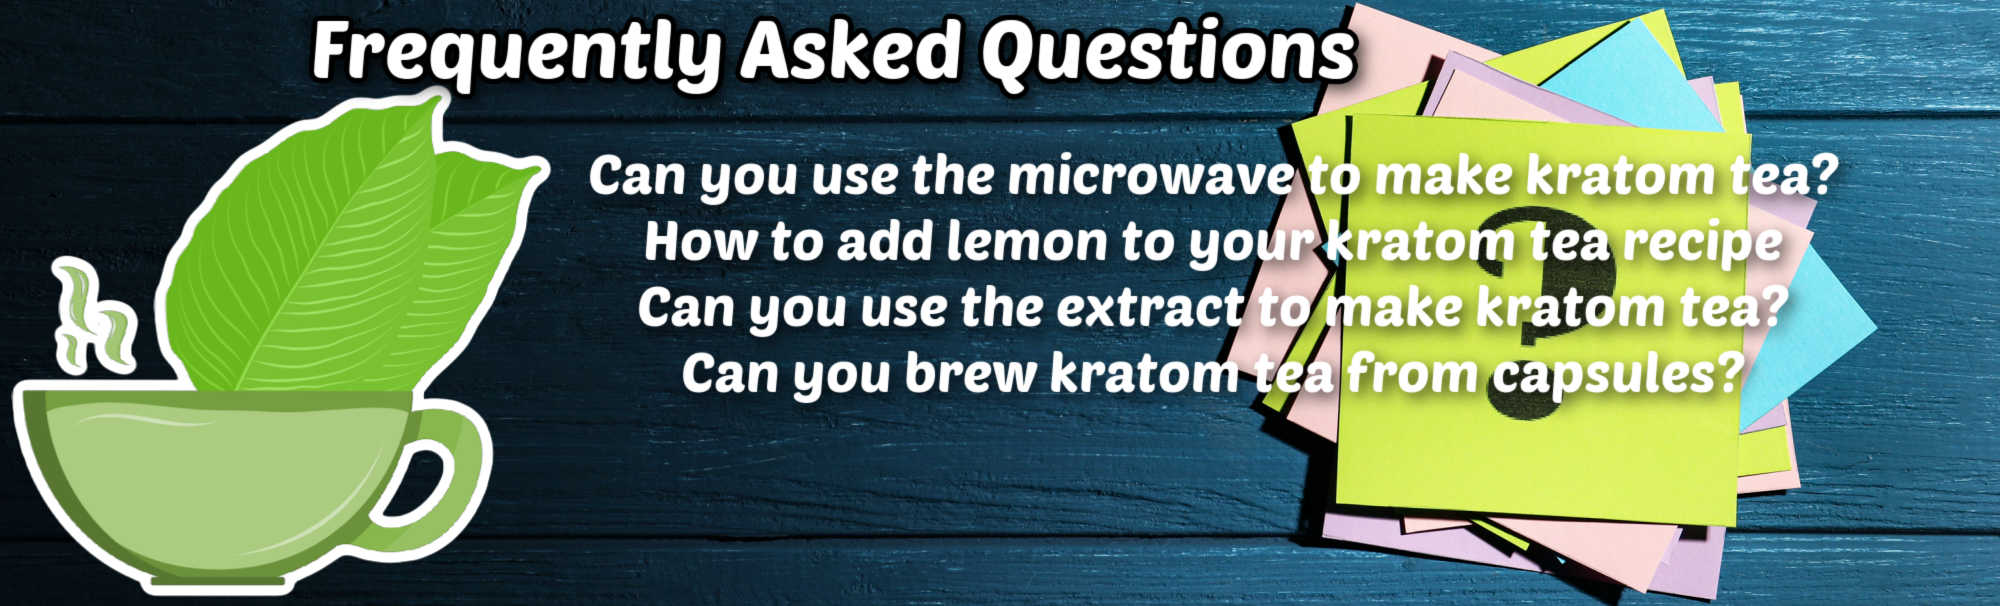 image of frequently asked questions about kratom tea